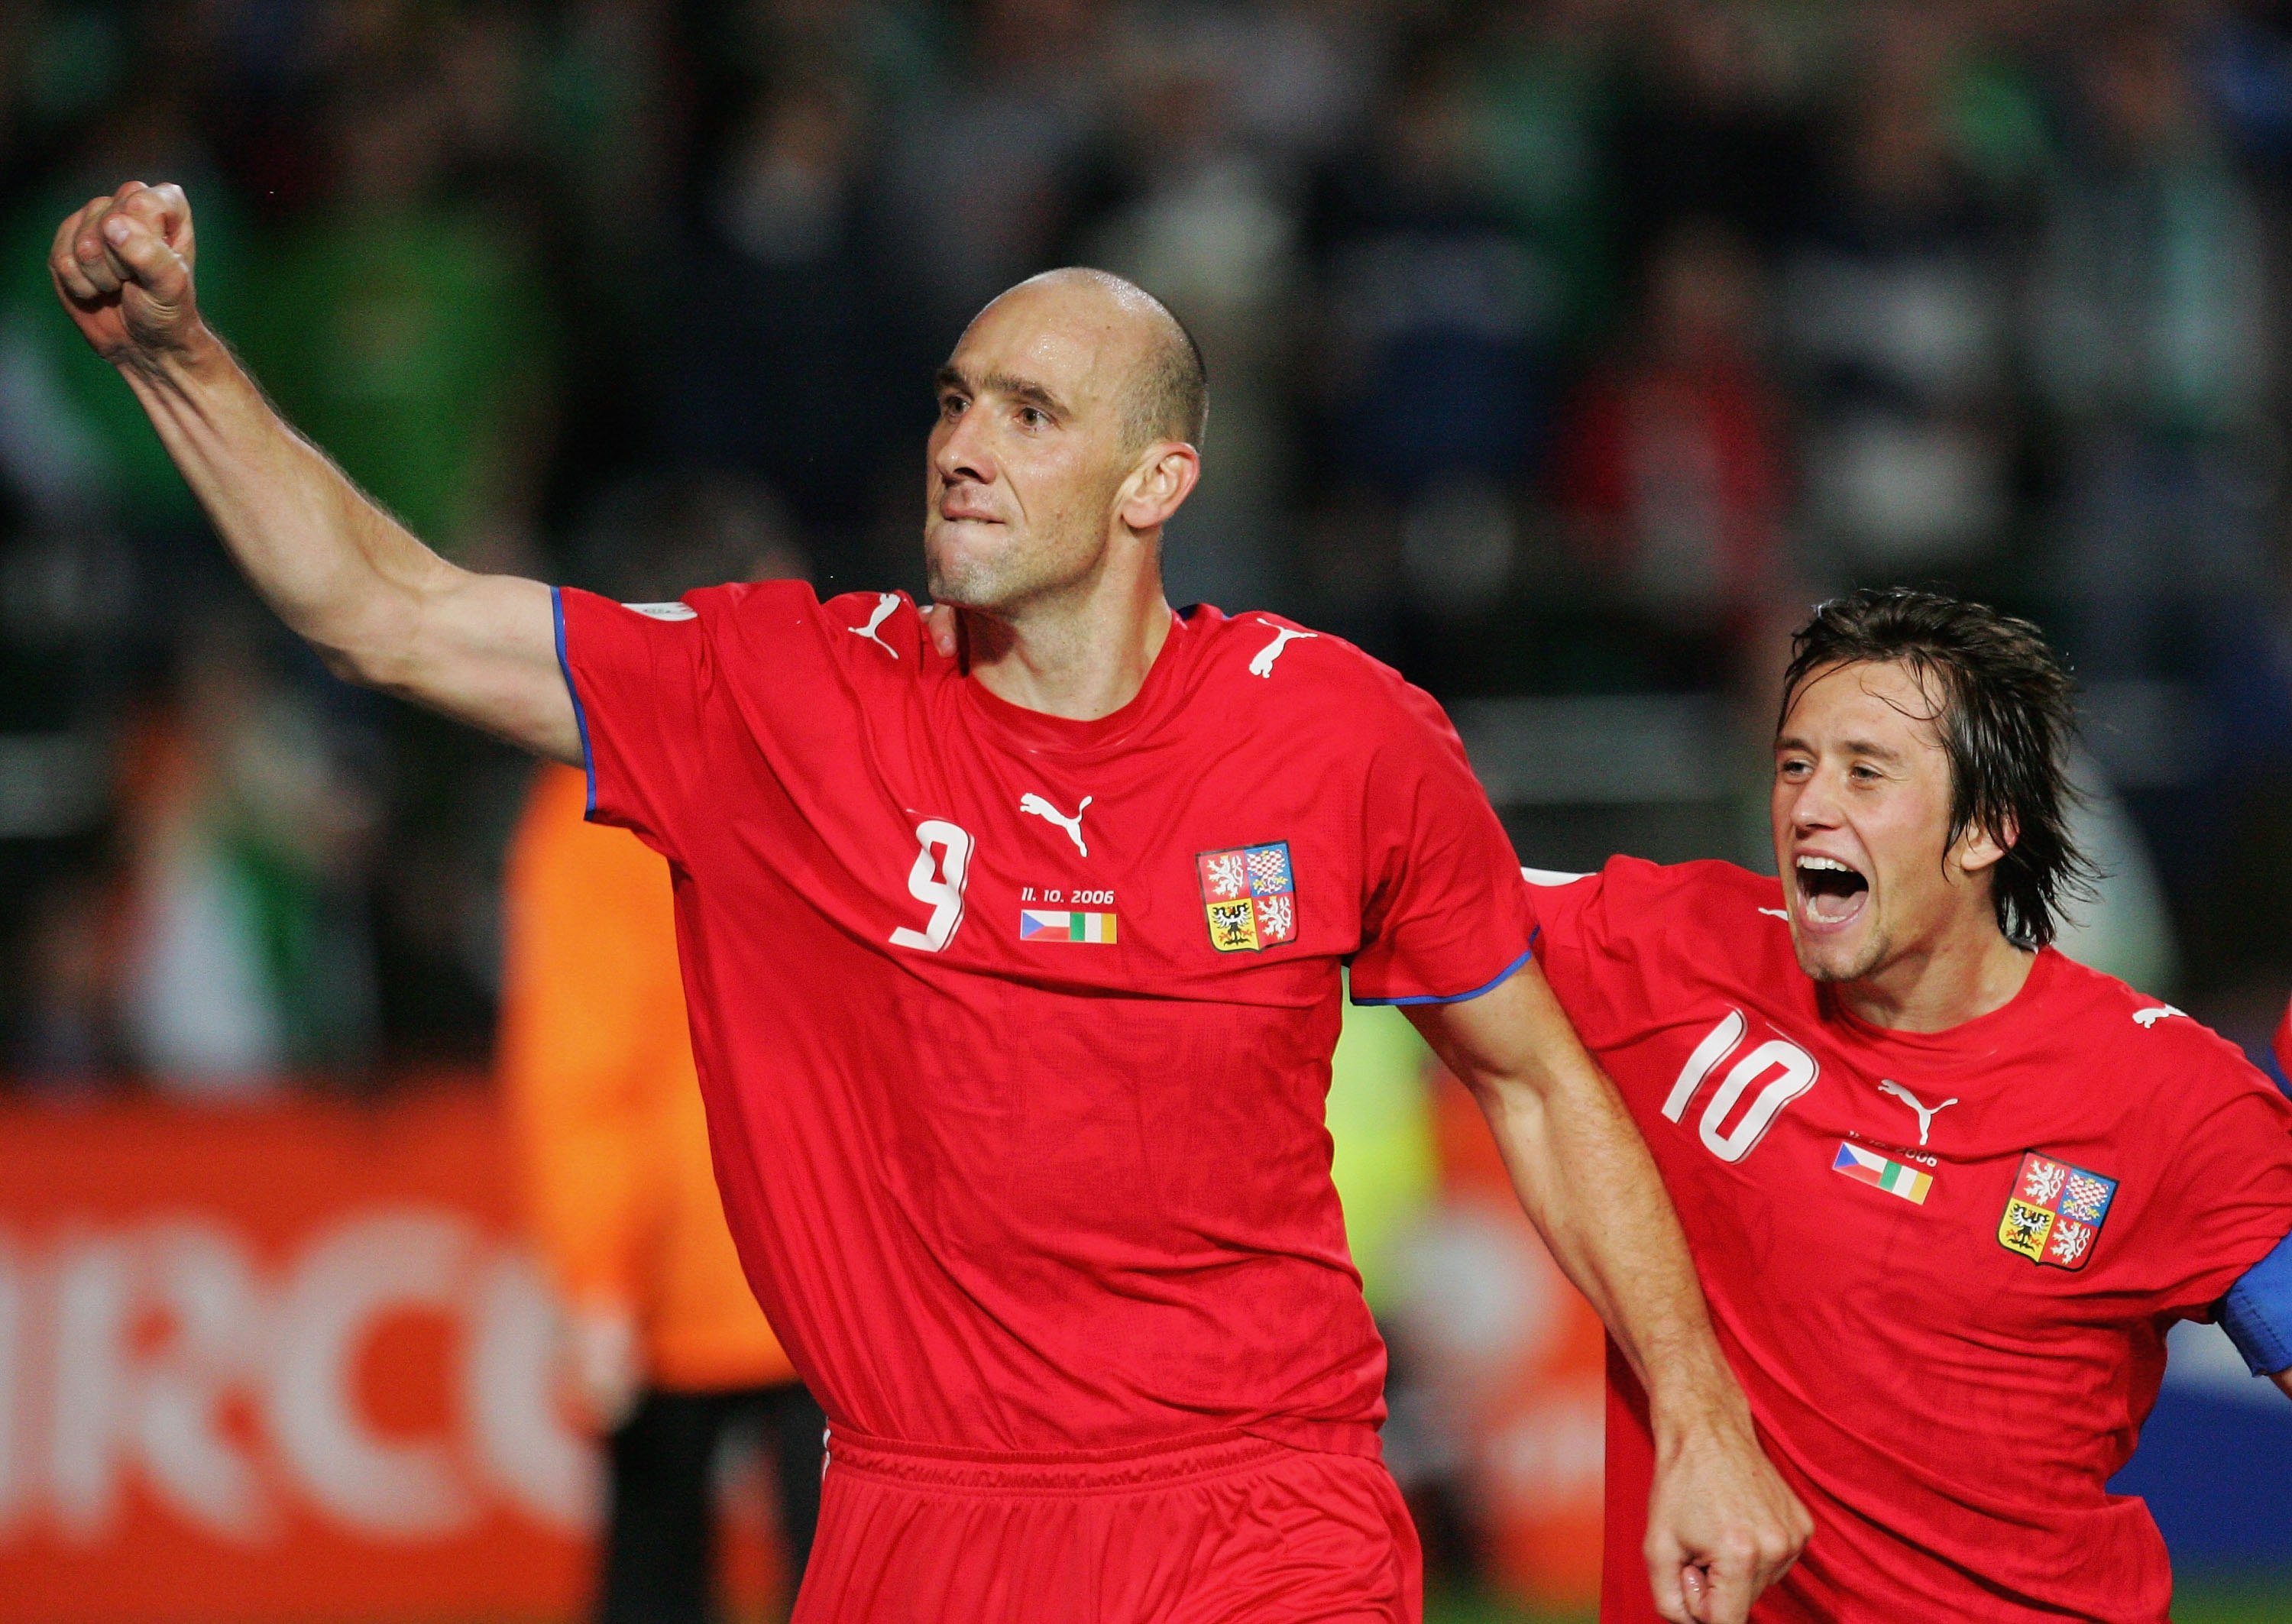 DUBLIN, IRELAND - OCTOBER 11:  Jan Koller of Czech Republic celebrates scoring the equalising goal with Tomas Rosicky during the Euro2008 Qualifier between Republic of Ireland and Czech Republic at Lansdowne Road on October 11, 2006 in Dublin, Ireland.  (